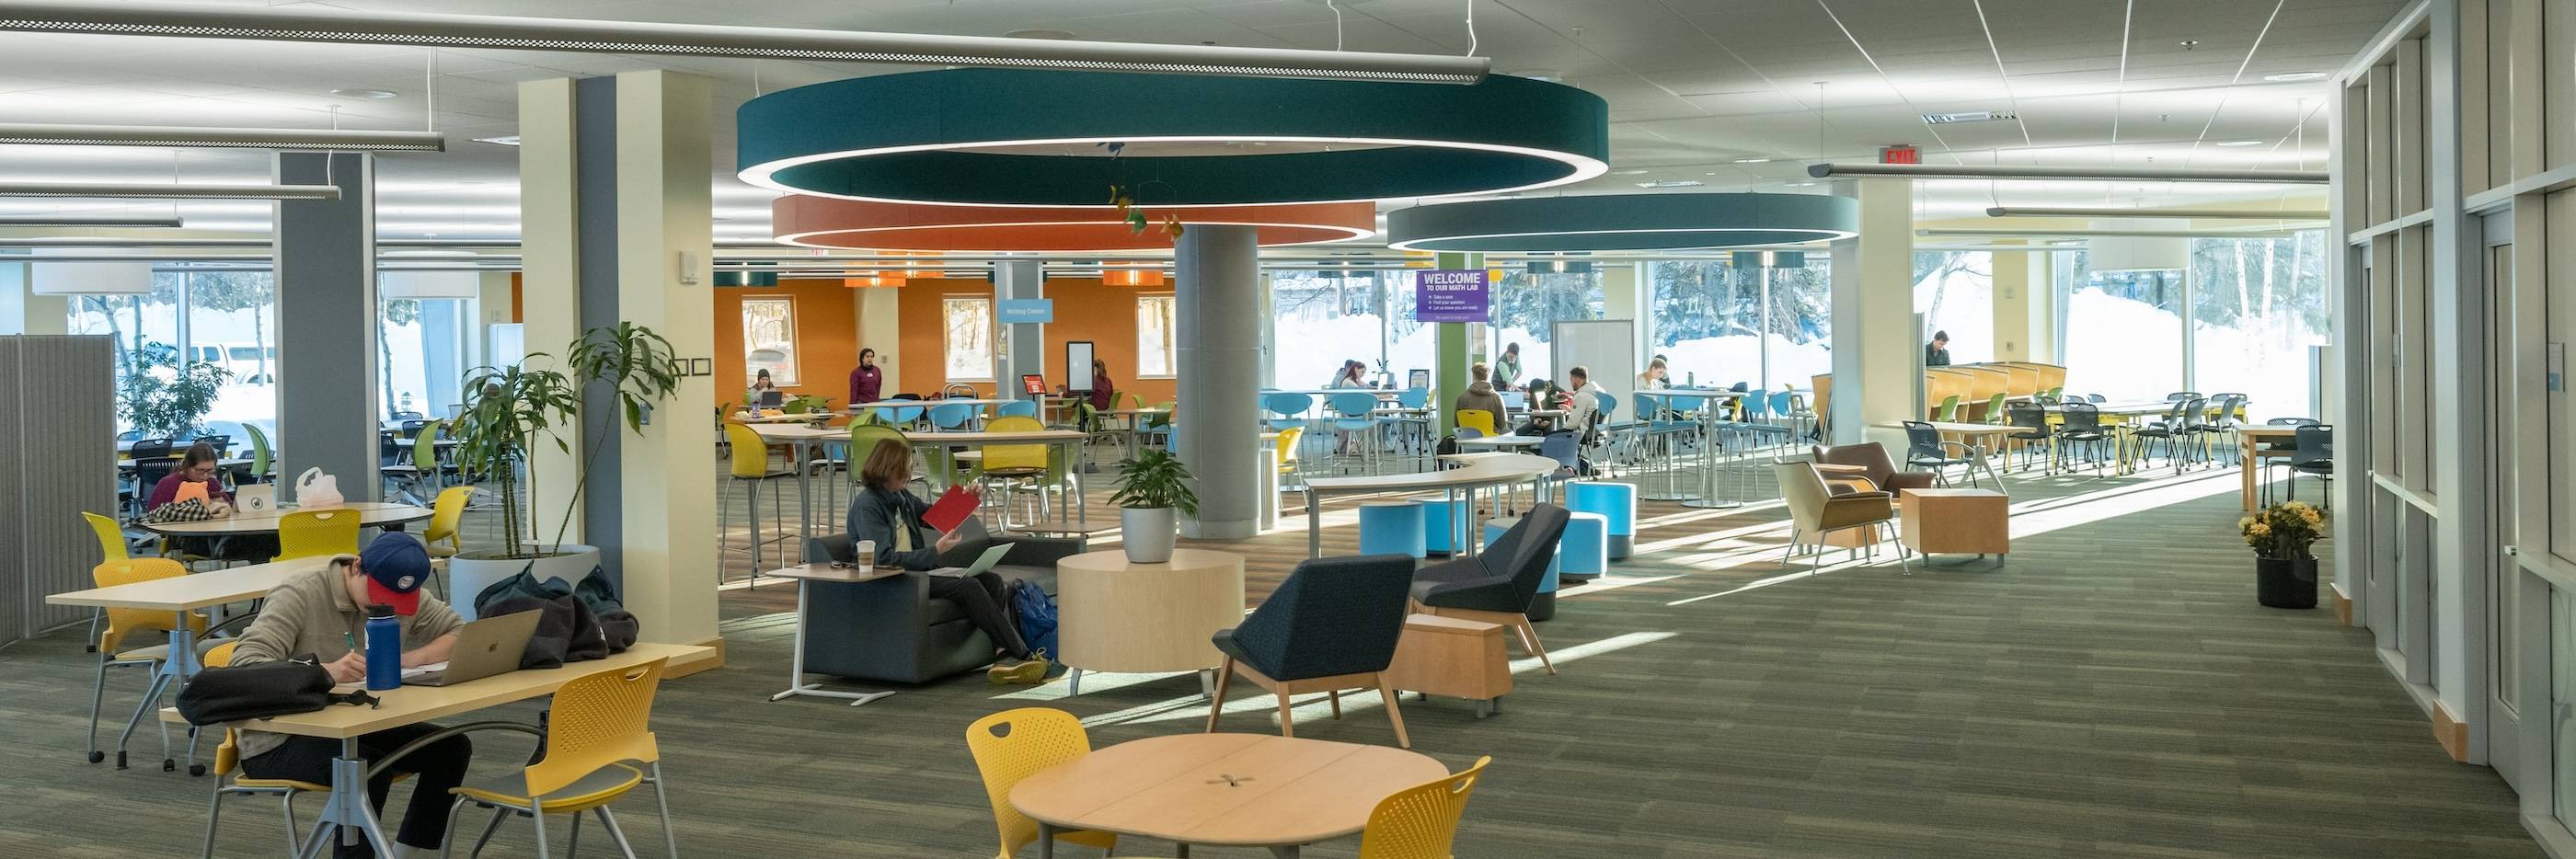 Learning Commons Open Area